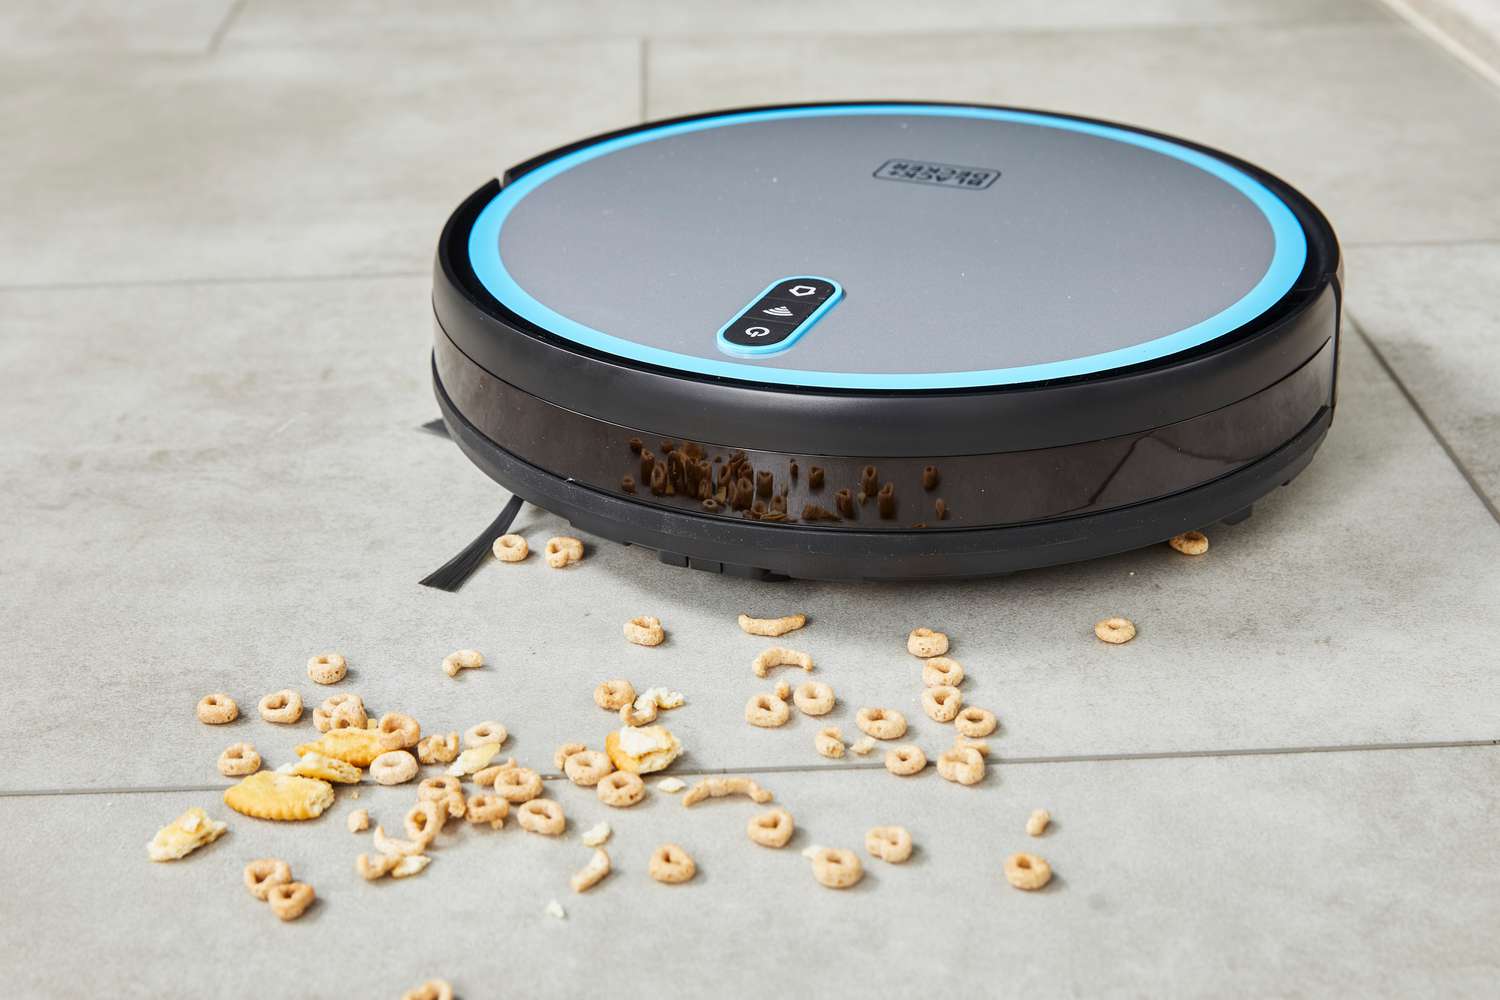 A Black + Decker RoboSeries Robot Vacuum cleans up Cheerios and crackers from a tile floor